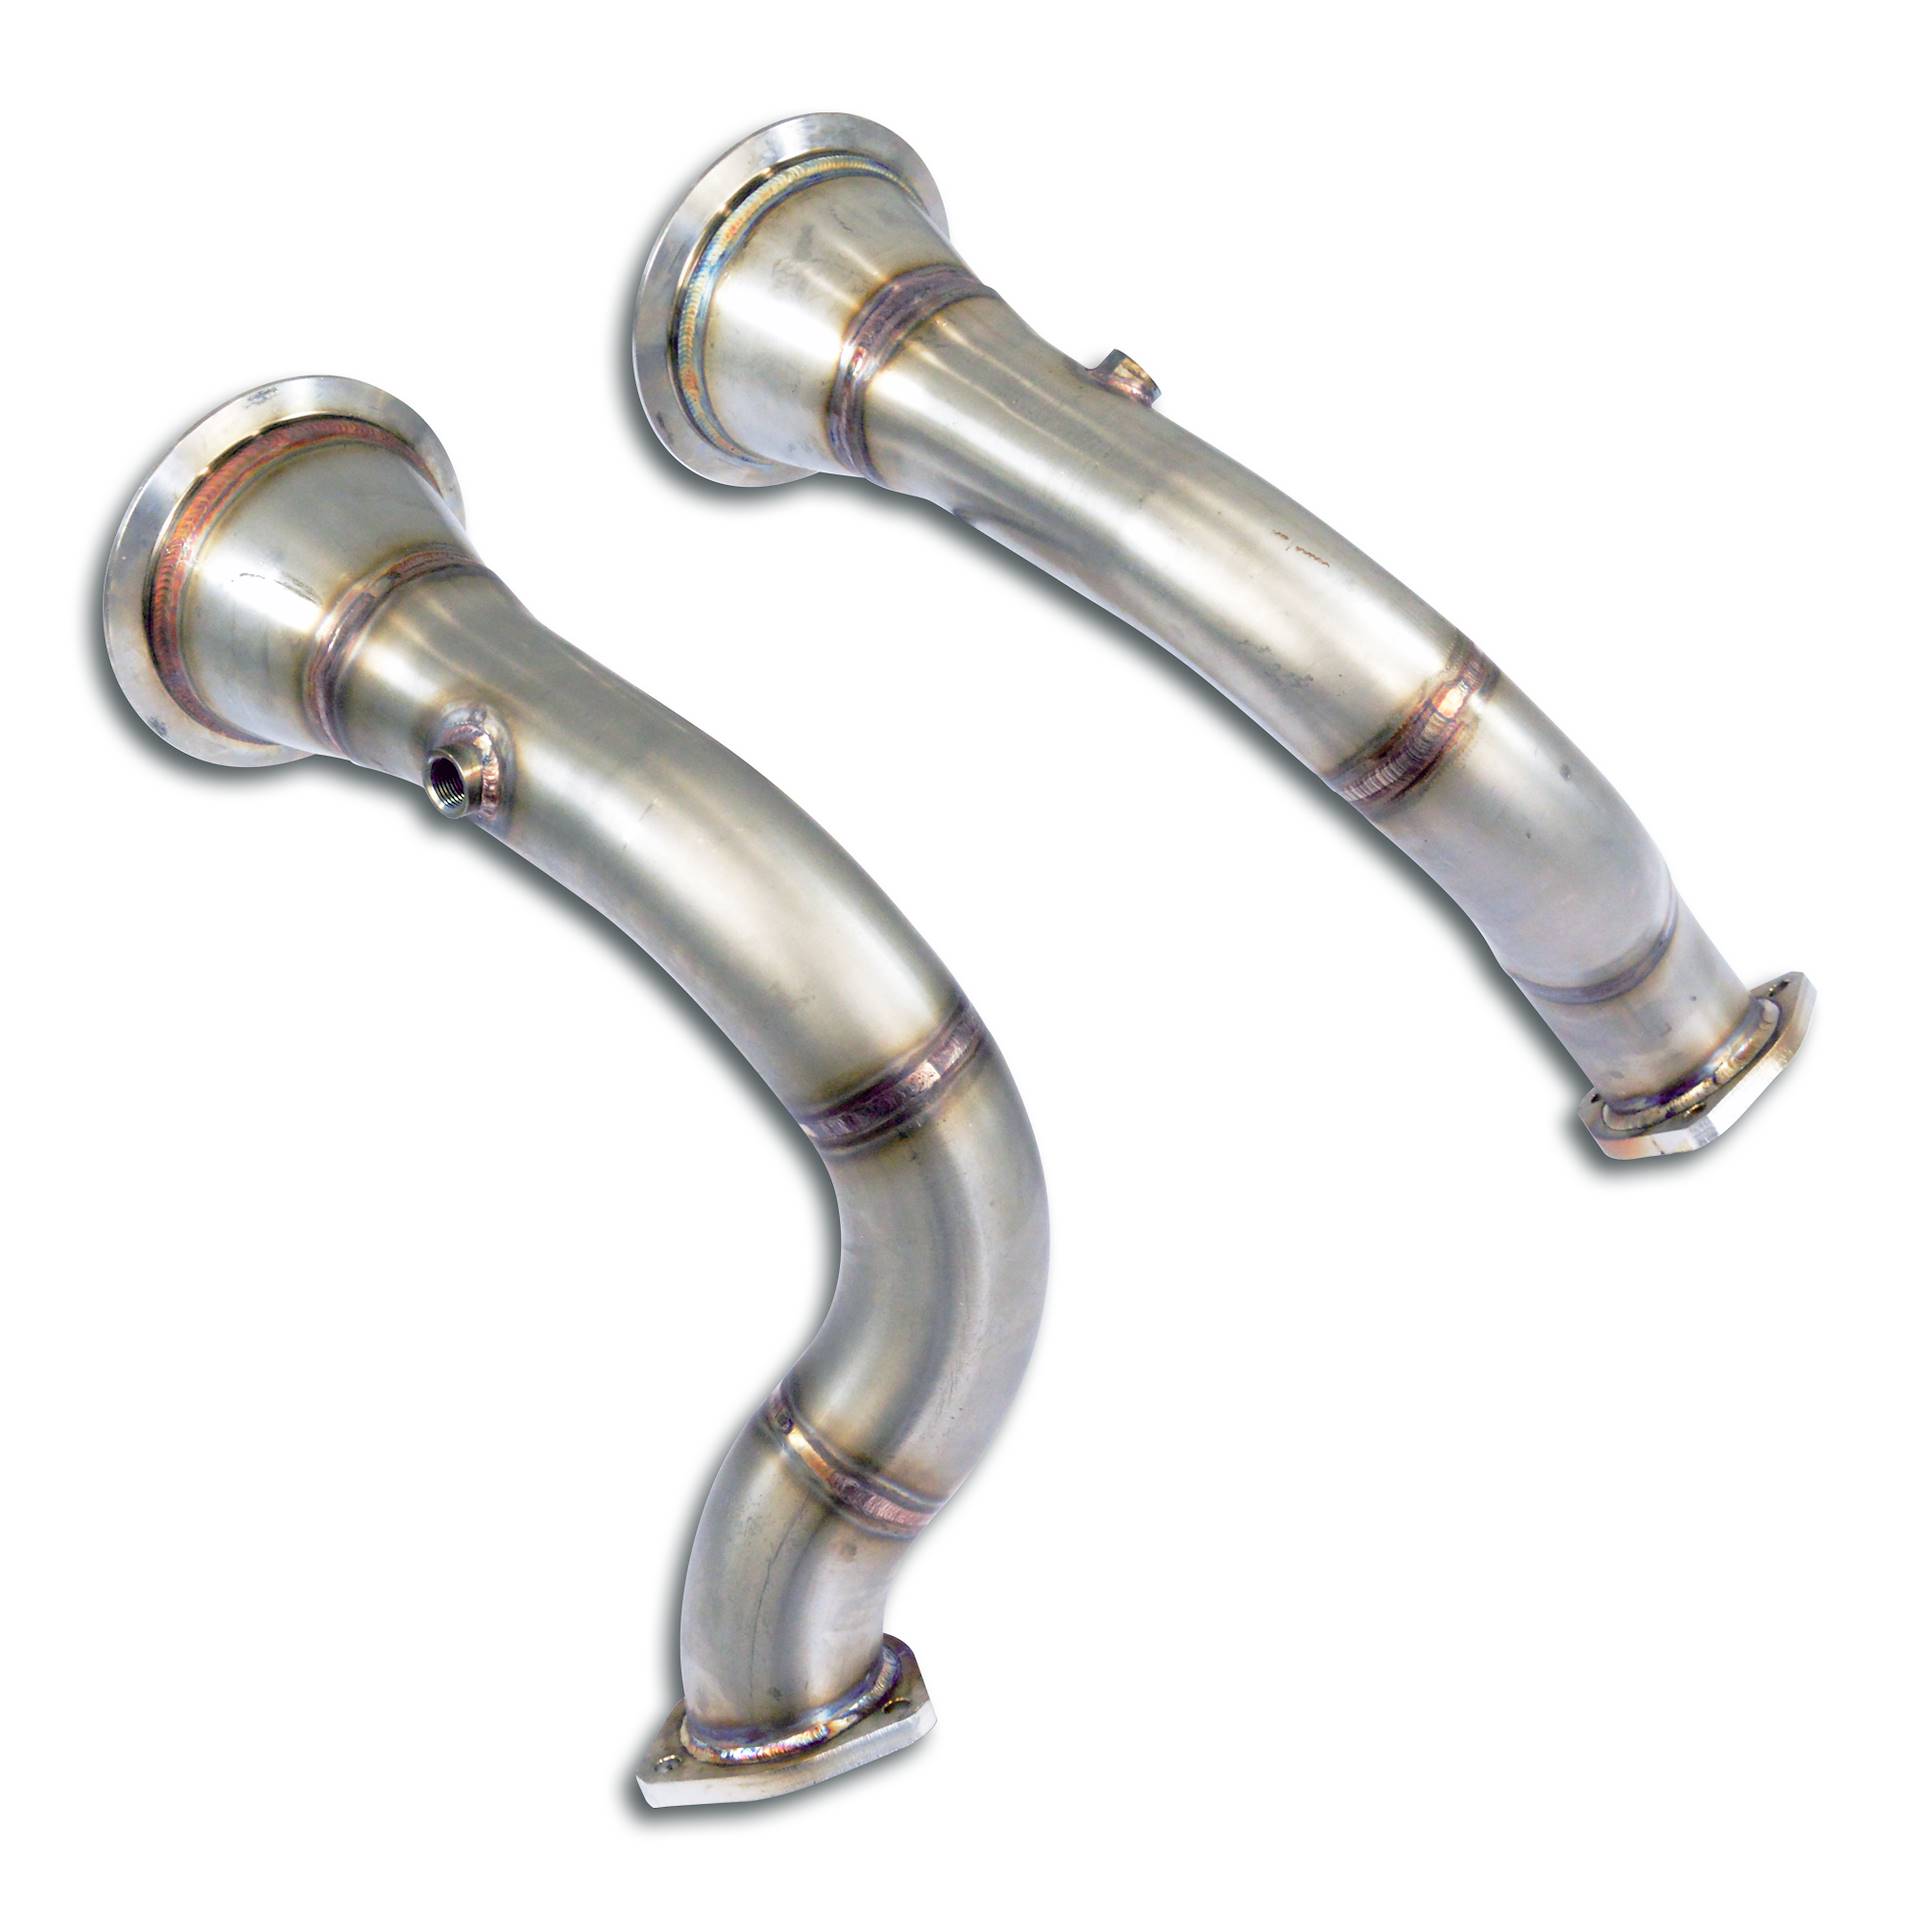 Downpipe Supersprint 778711